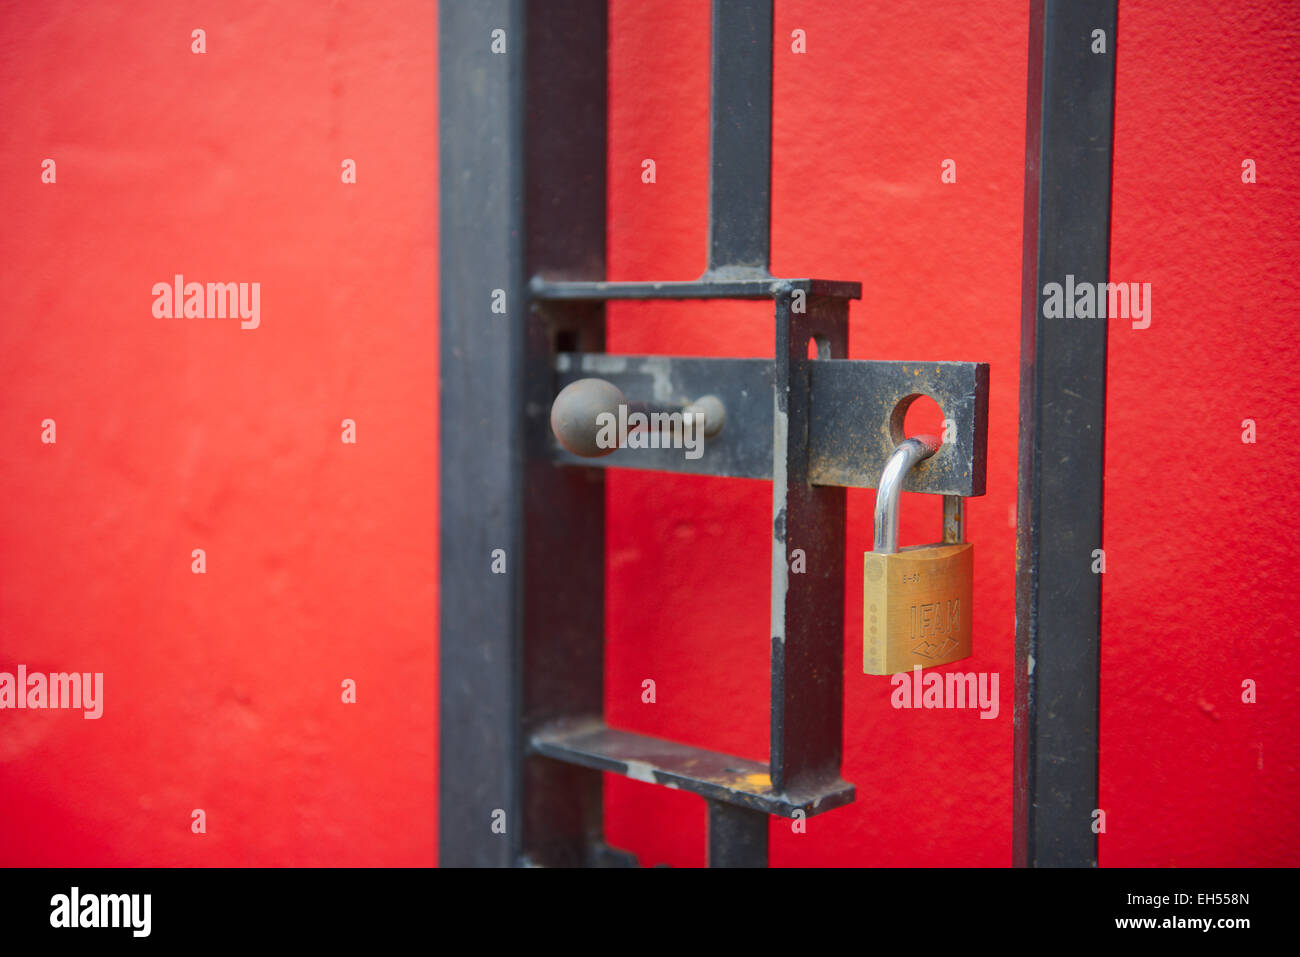 Padlock locked on open bolt in metal gate in front of red wall Stock Photo